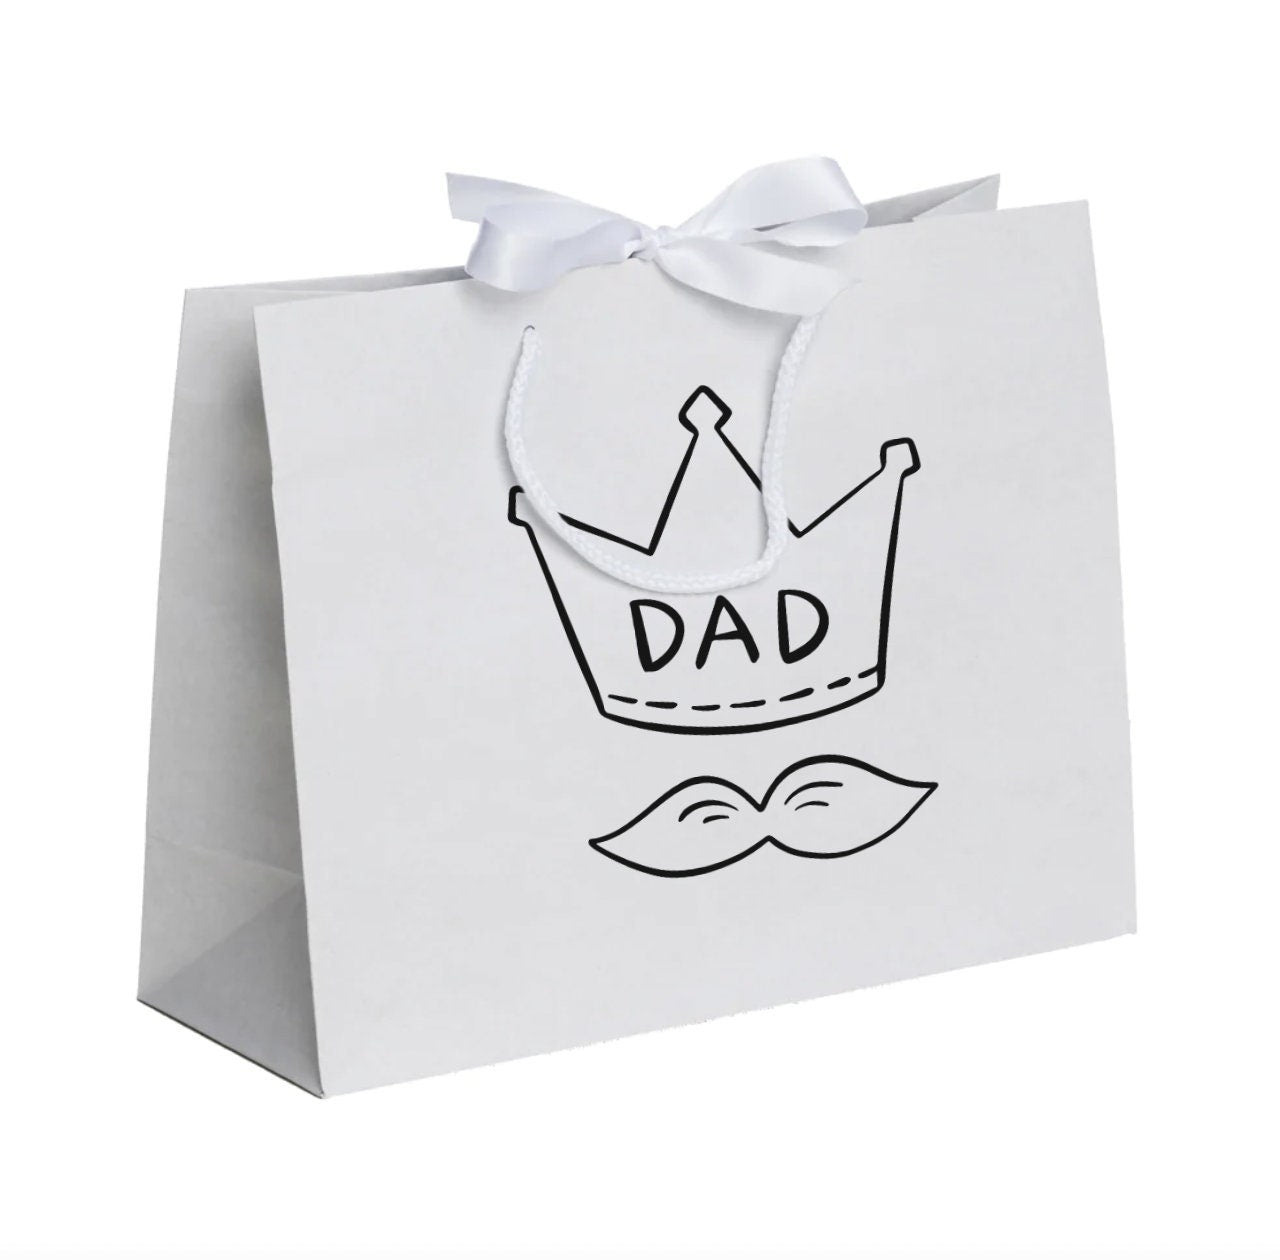 Dad Fathers Day Gift Bag, Fathers Day Gift Bag, Fathers Day Gift, Gift Bag for present, Daddy Gift Bag, Dad Gifts, Gift for dad